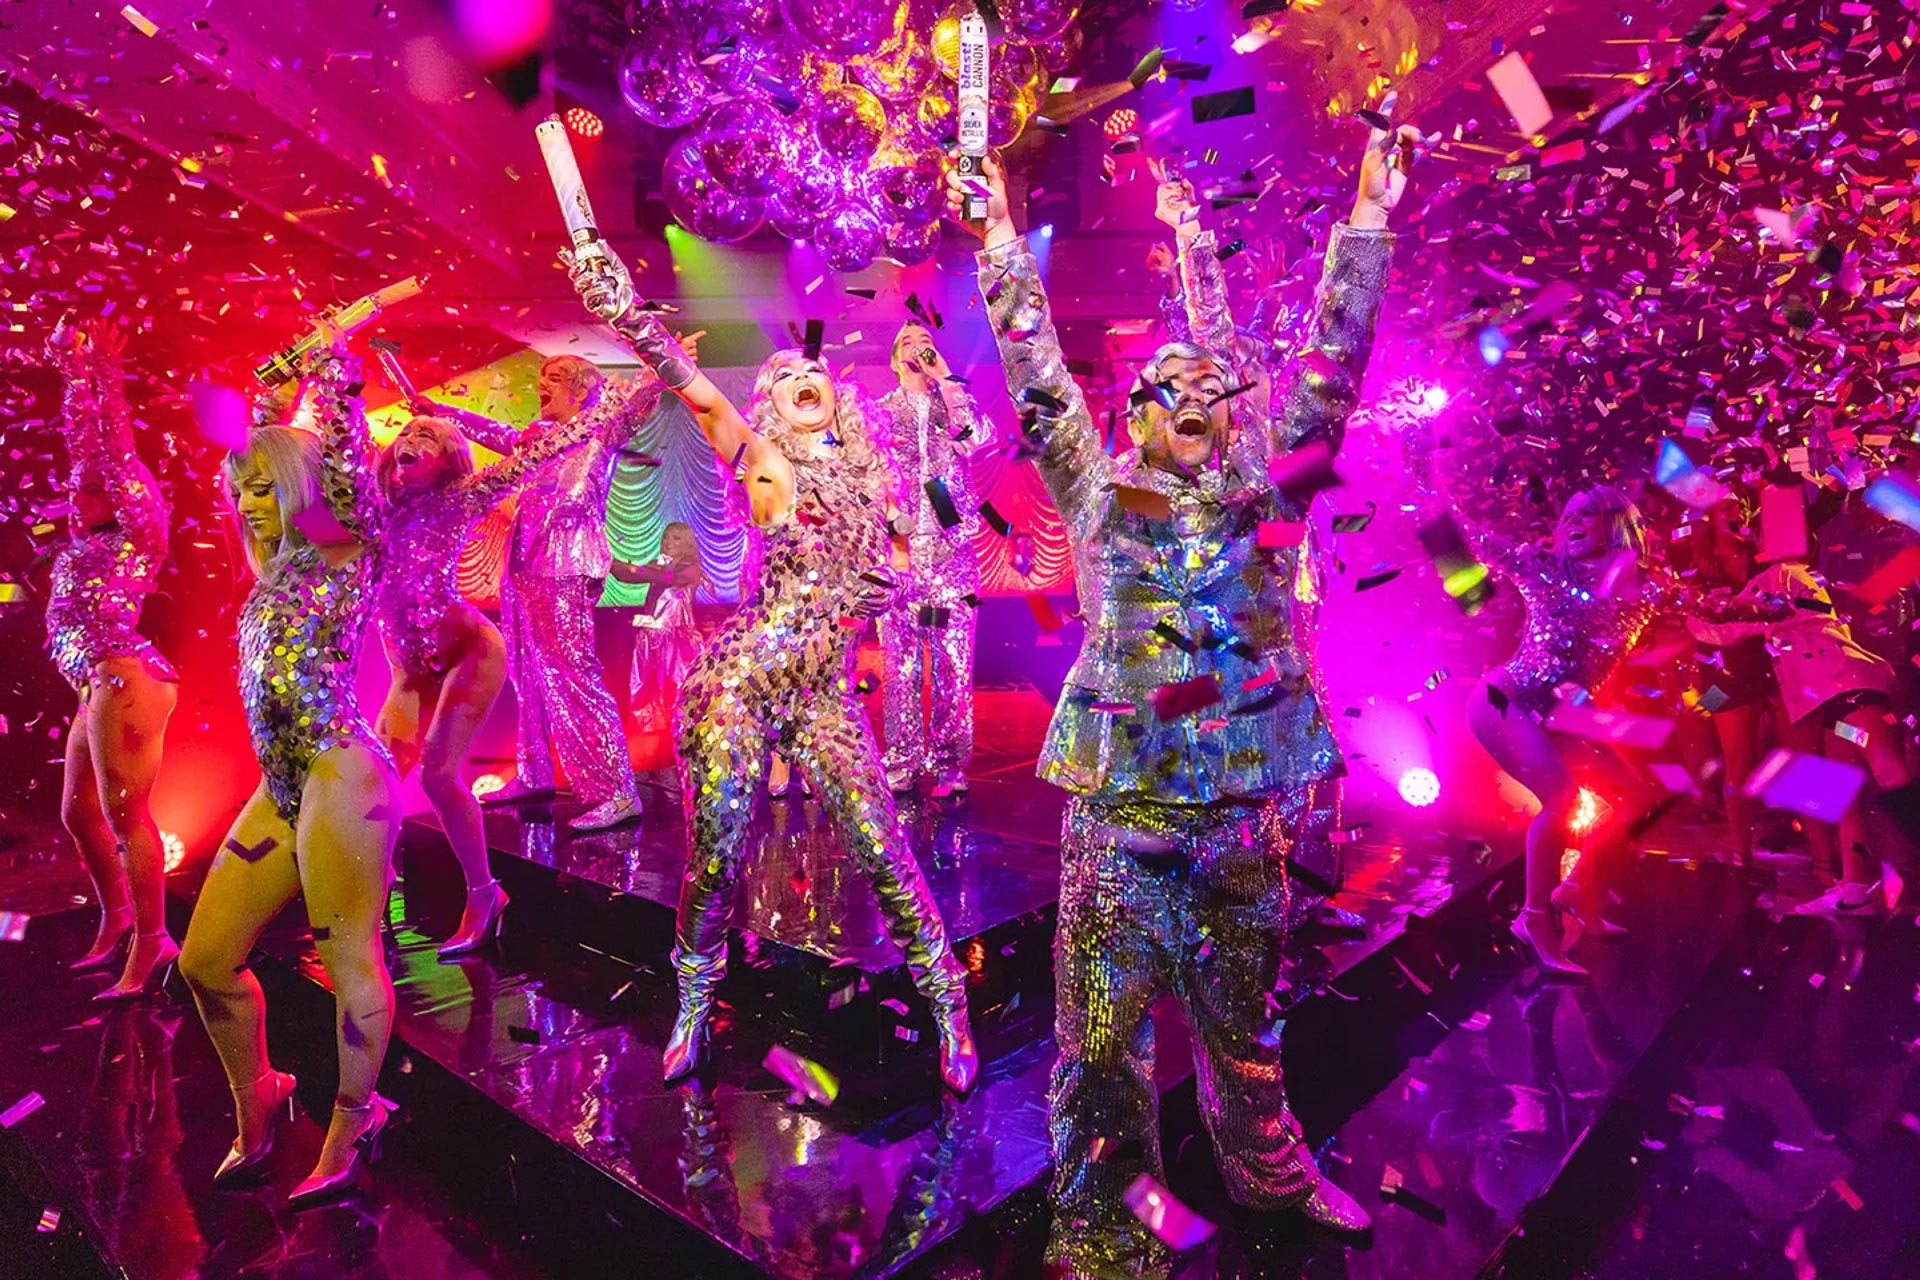 people celebrating in a colorful setting with confetti